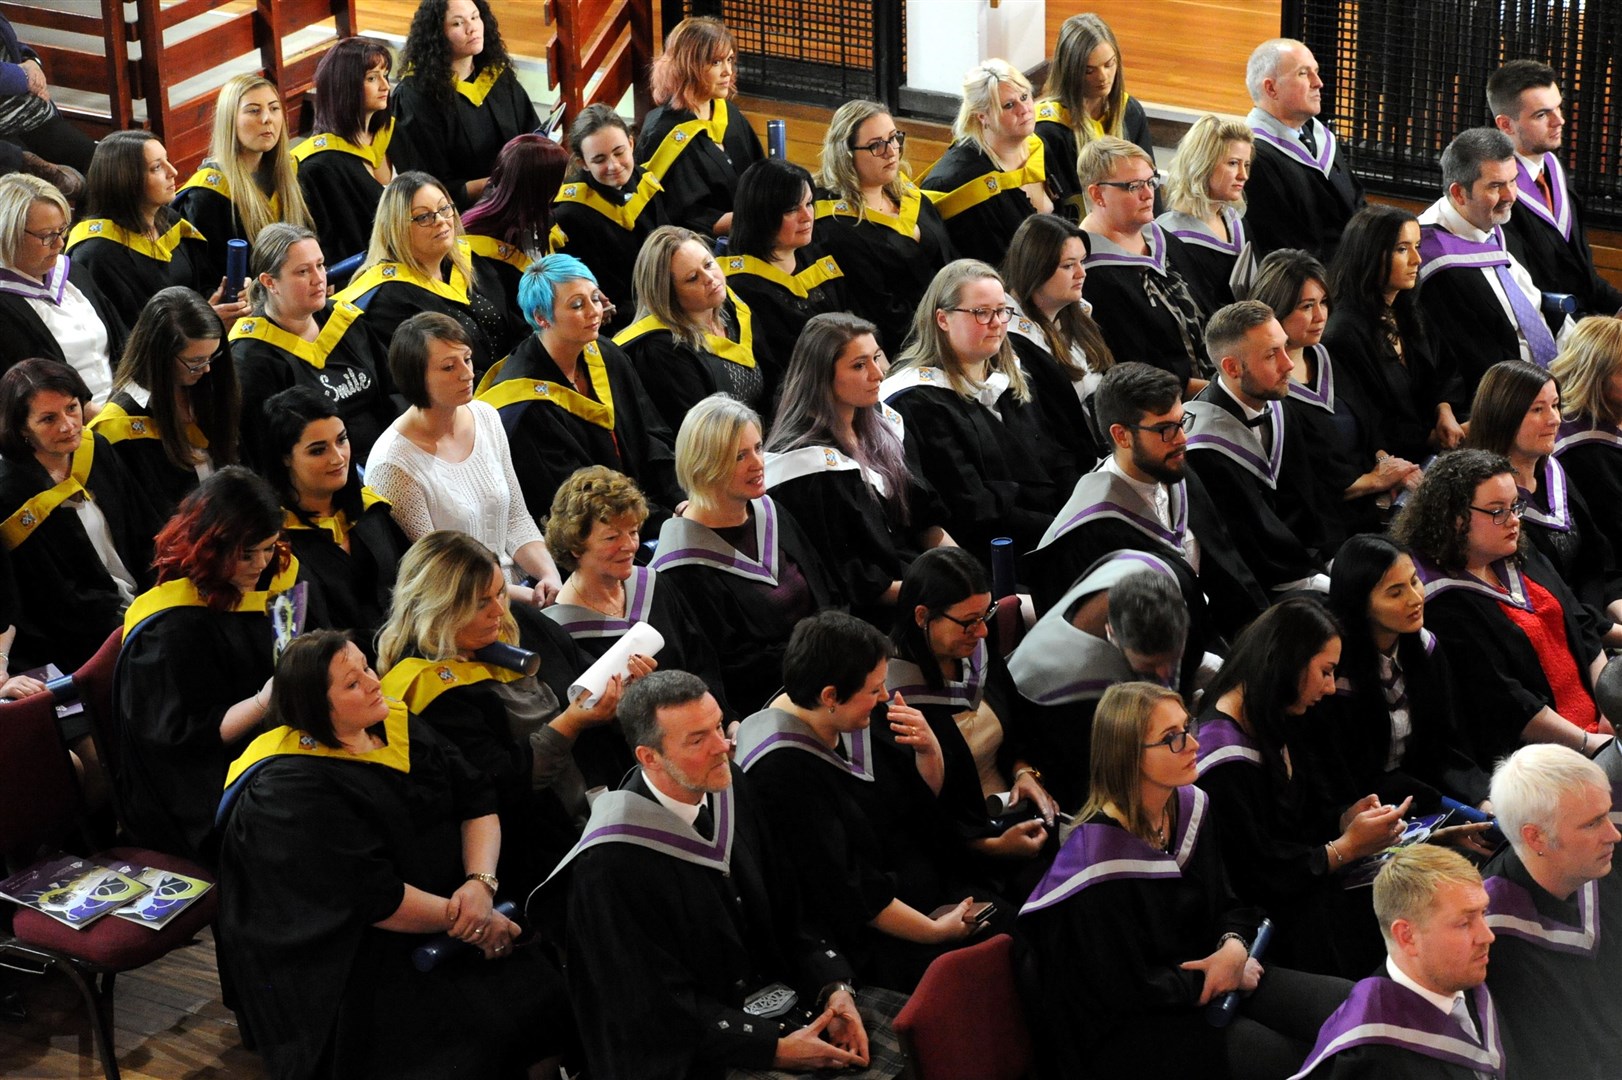 Students from Moray College UHI attend a graduation ceremony in Elgin's Town Hall. Picture: Eric Cormack. Image No. 042442.